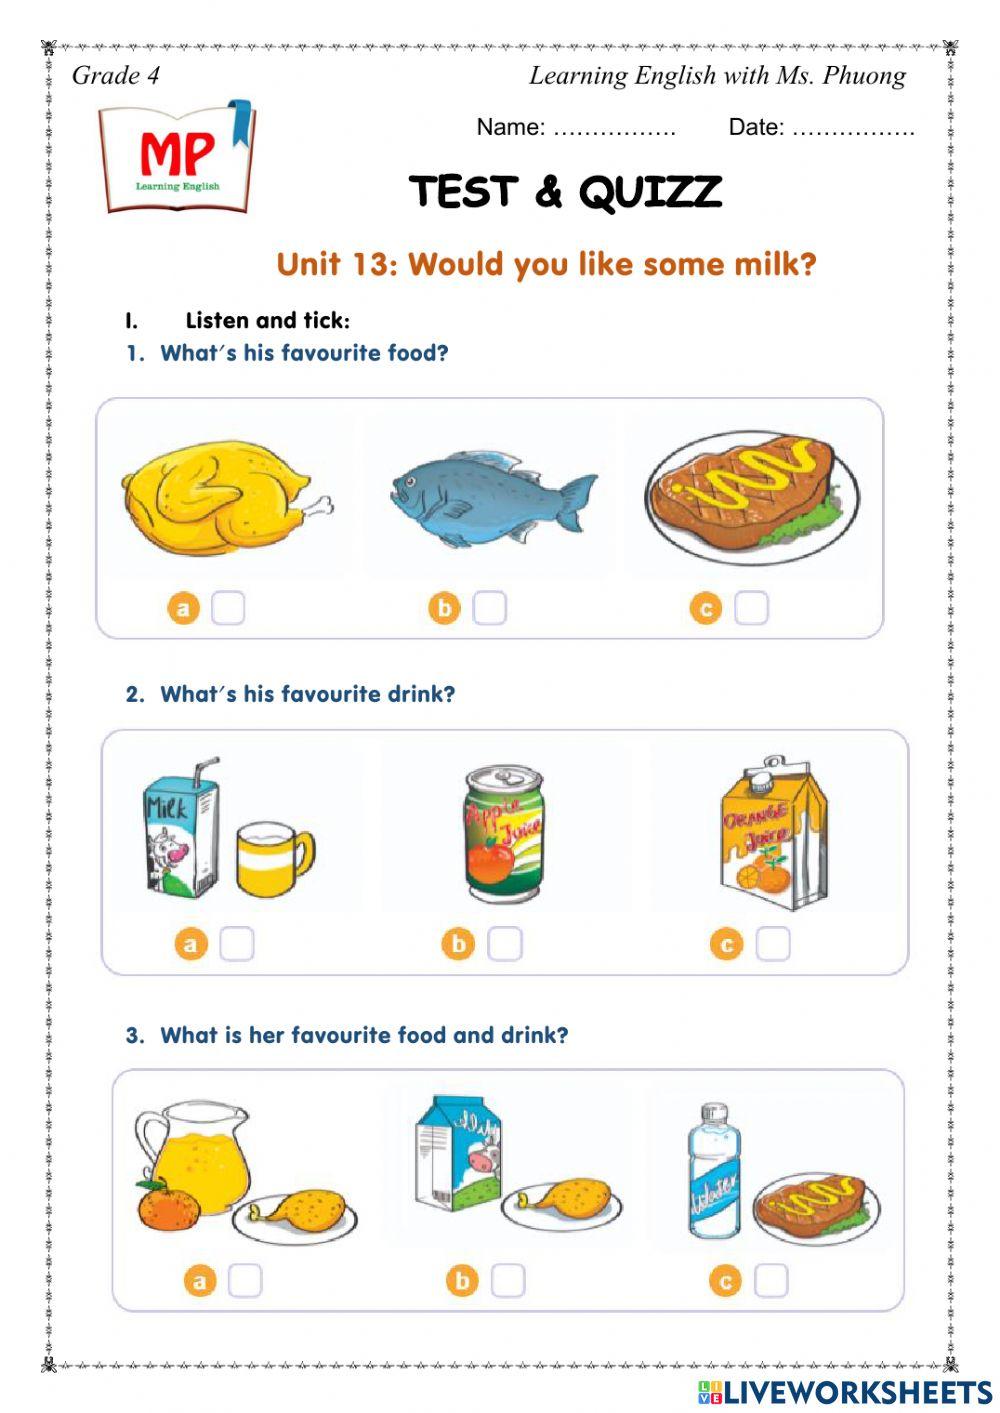 English 4 - Unit 13 - Would you like some milk?